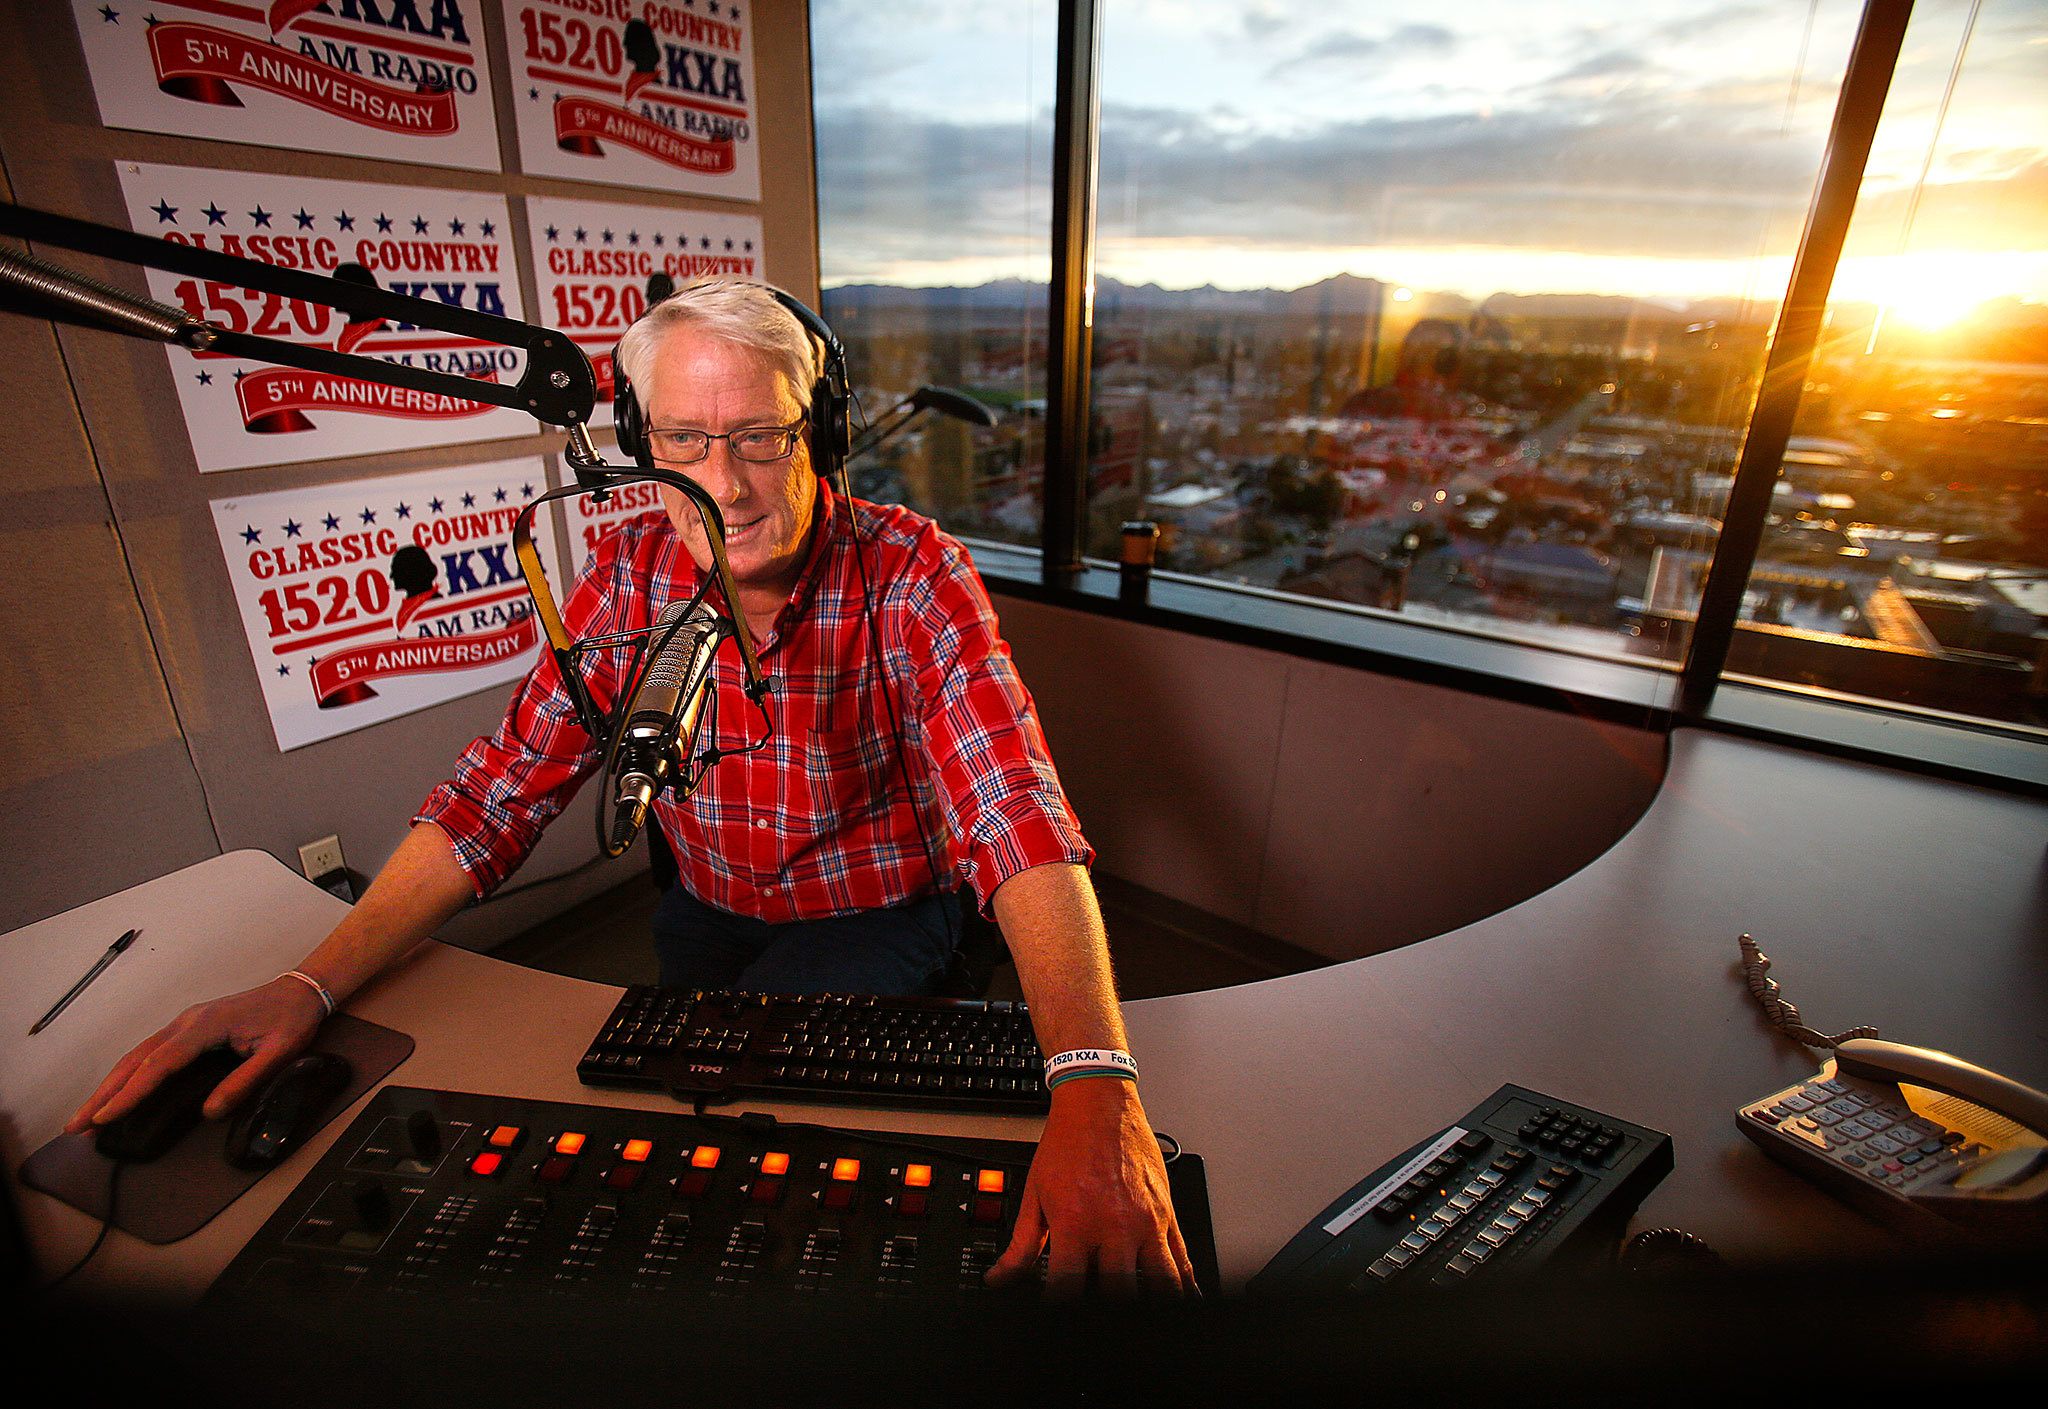 Two Everett AM radio stations approved to broadcast on FM | HeraldNet.com